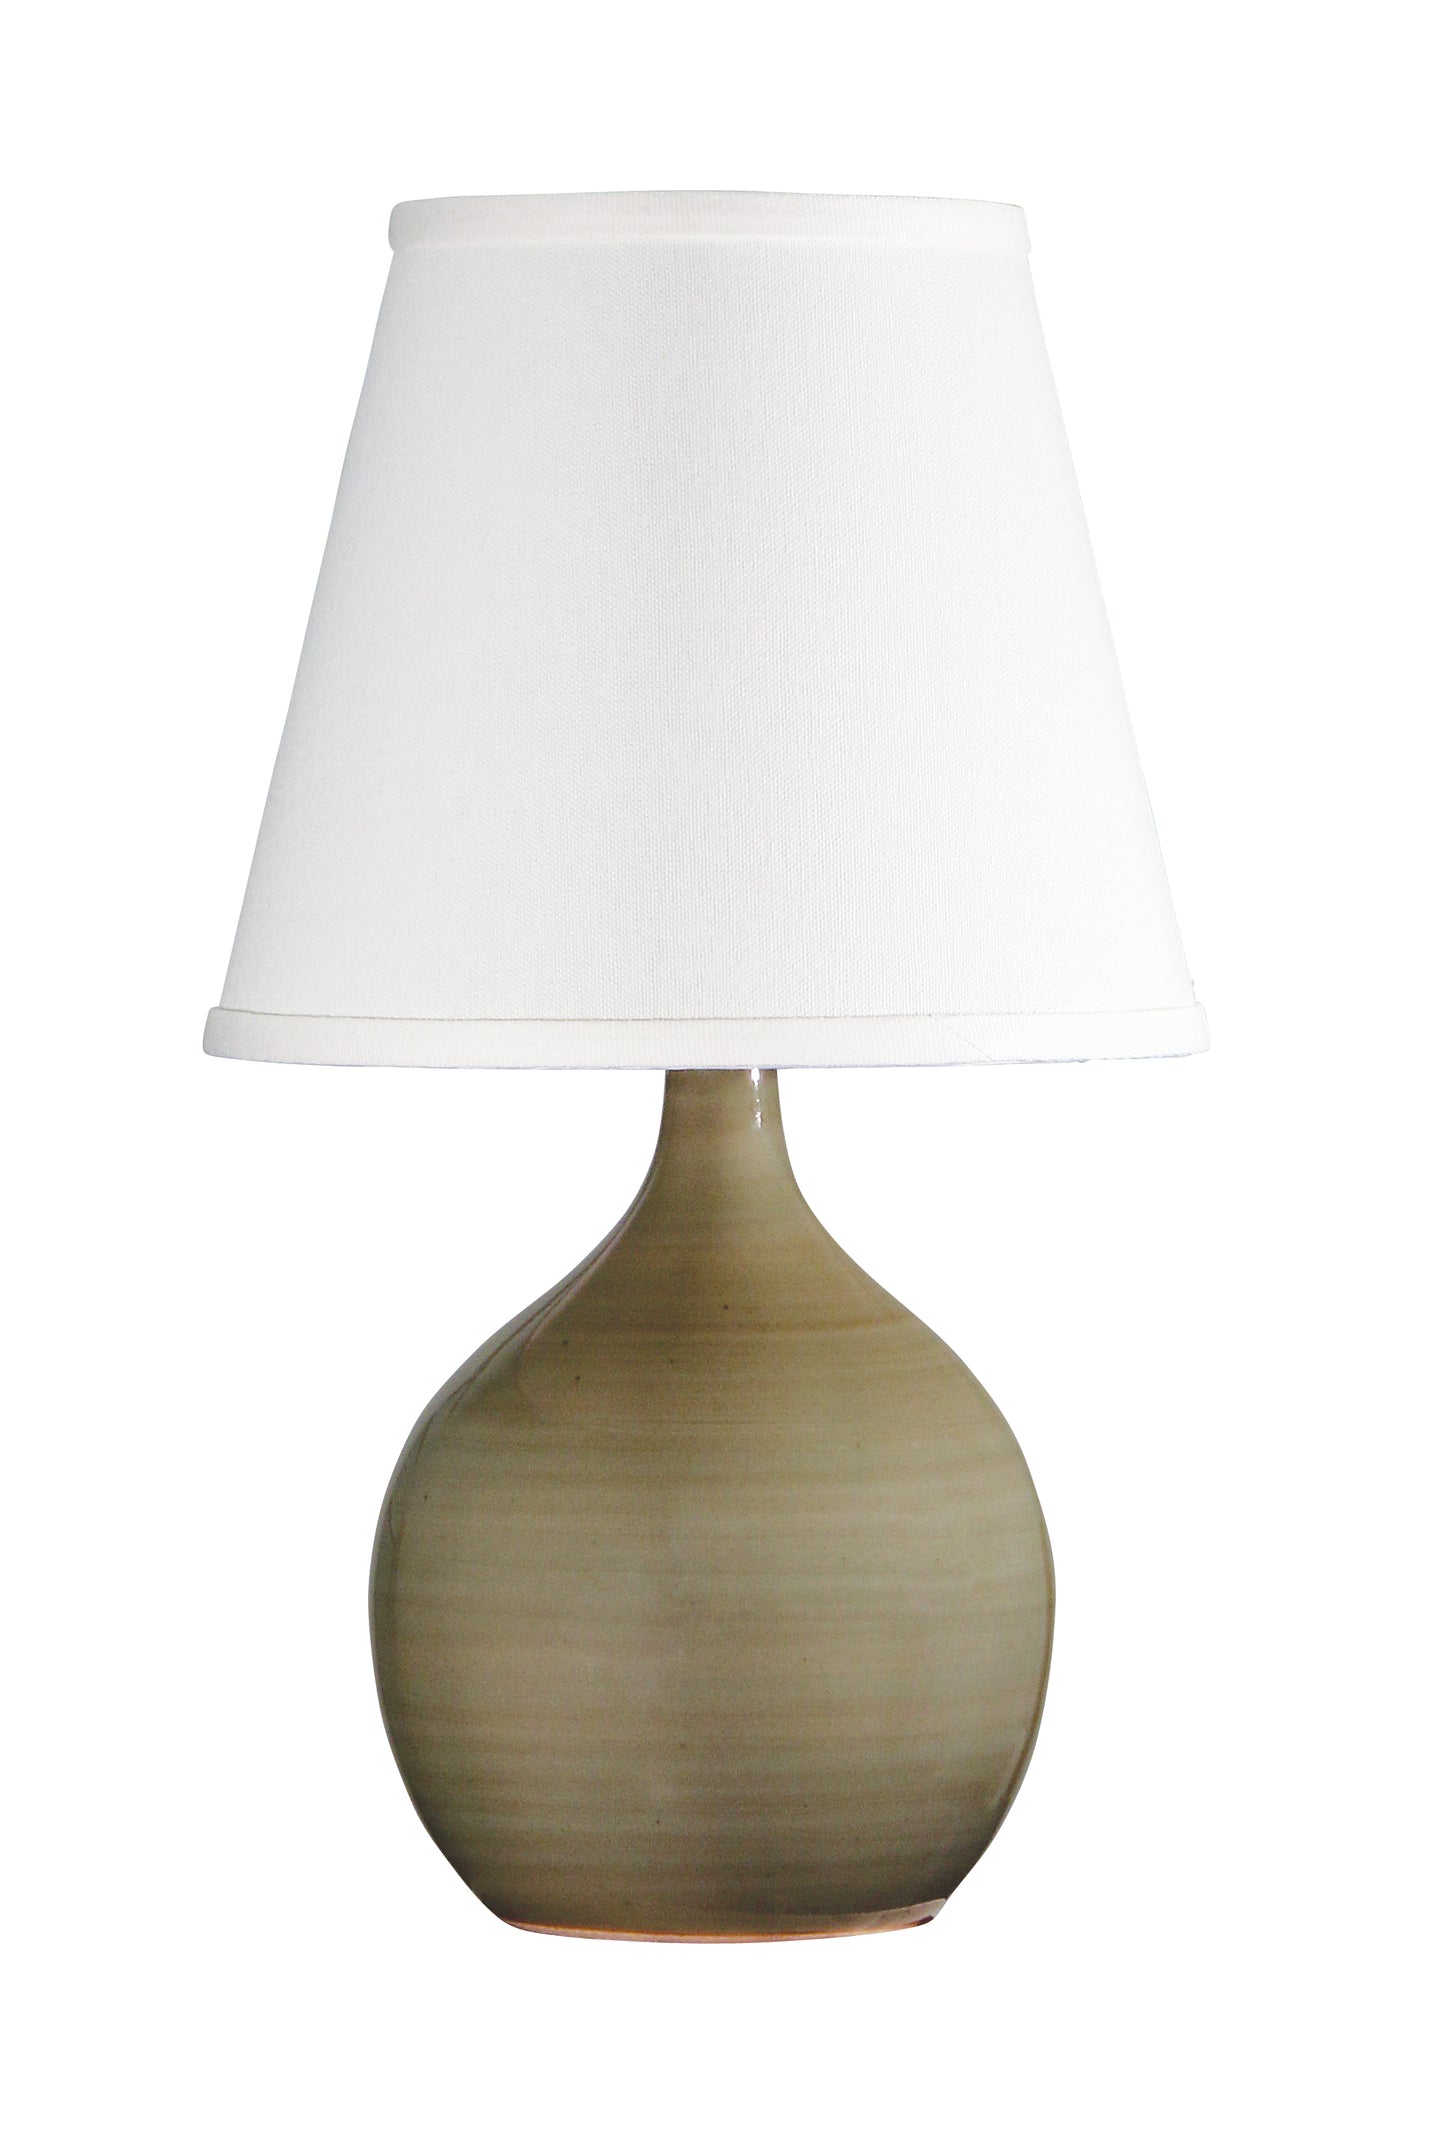 House of Troy Scatchard 13.5" Mini Accent Lamp in Celadon GS50-CG